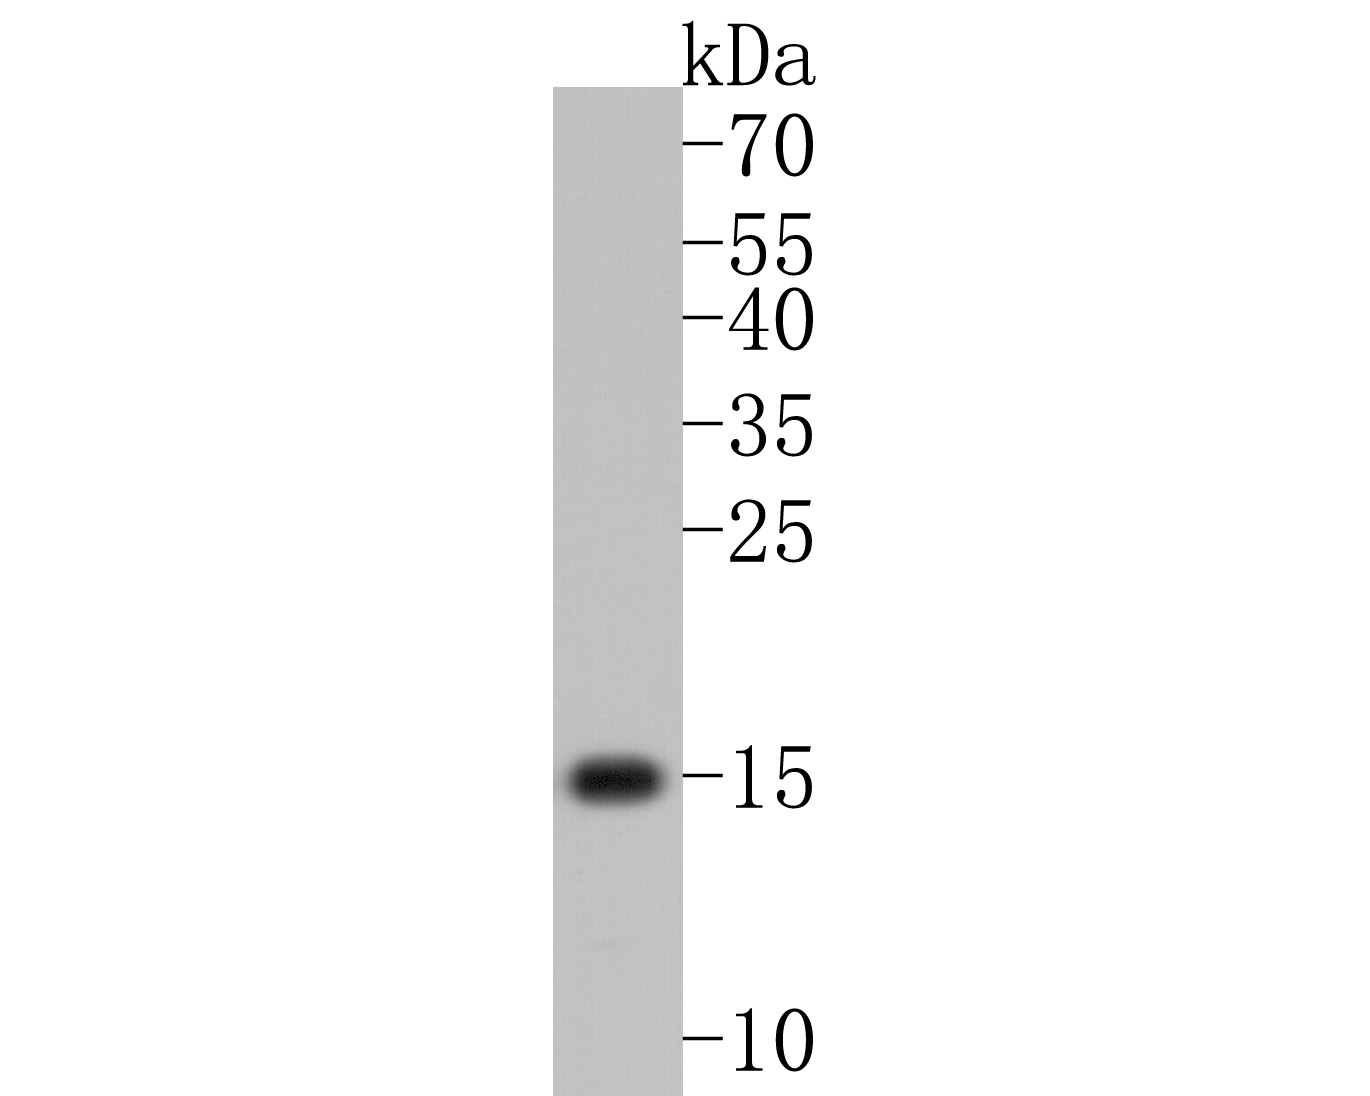 Western blot analysis of VAMP2 on Jurkat cell lysates. Proteins were transferred to a PVDF membrane and blocked with 5% BSA in PBS for 1 hour at room temperature. The primary antibody (ET1703-50, 1/500) was used in 5% BSA at room temperature for 2 hours. Goat Anti-Rabbit IgG - HRP Secondary Antibody (HA1001) at 1:200,000 dilution was used for 1 hour at room temperature.